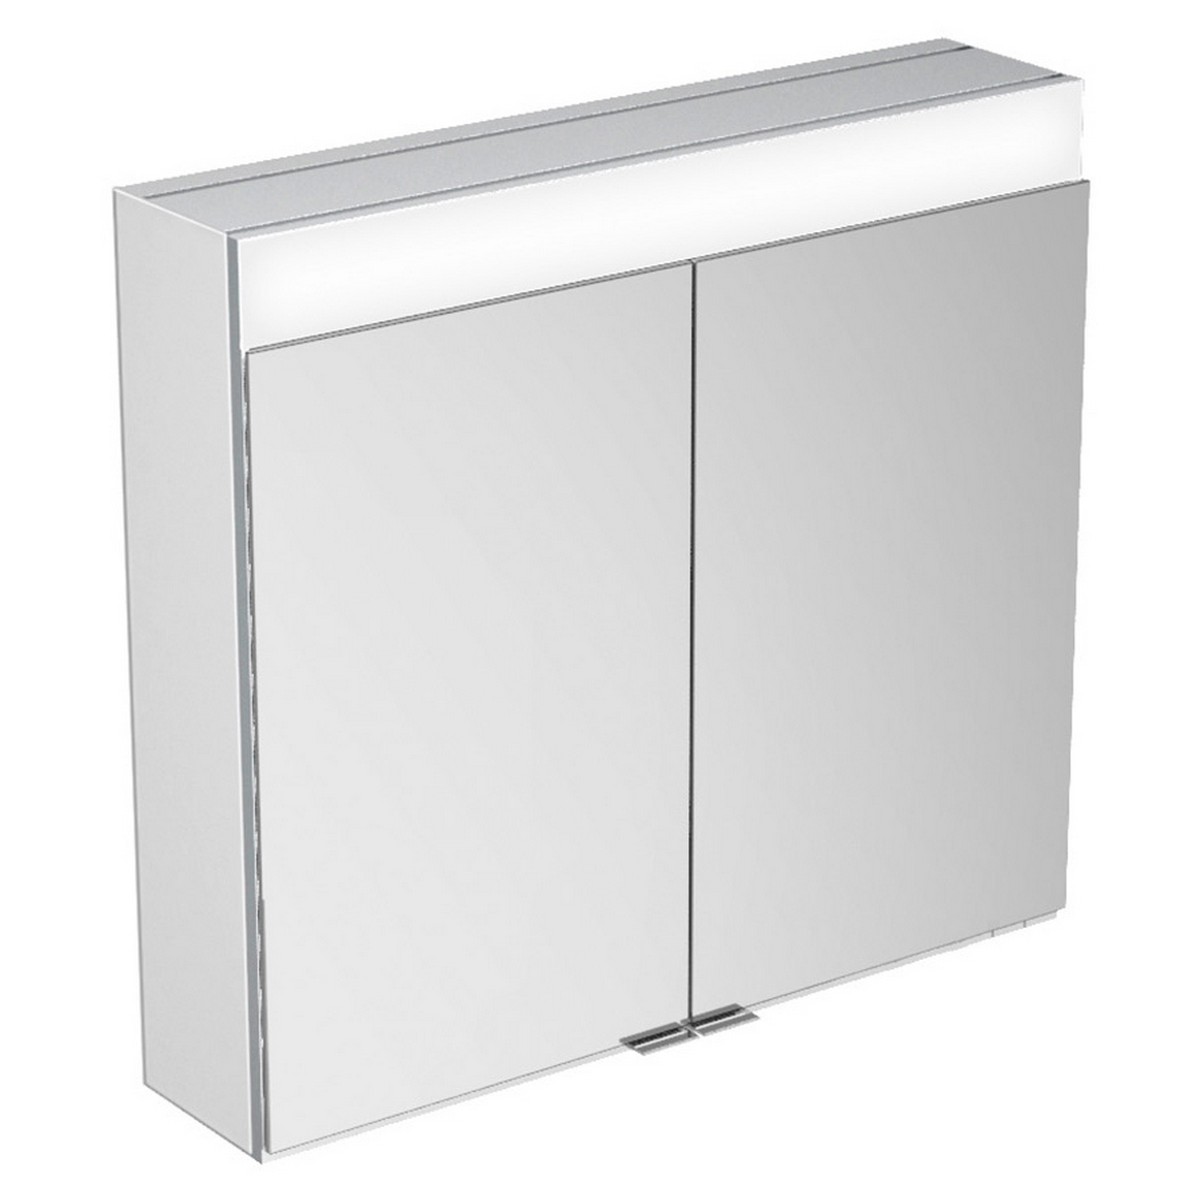 KEUCO 21531171351 EDITION 400 28 W X 6 1/2 D X 25 5/8 H INCH 2-DOOR 4000K LED WALL MOUNTED MIRROR MEDICINE CABINET IN ALUMINUM